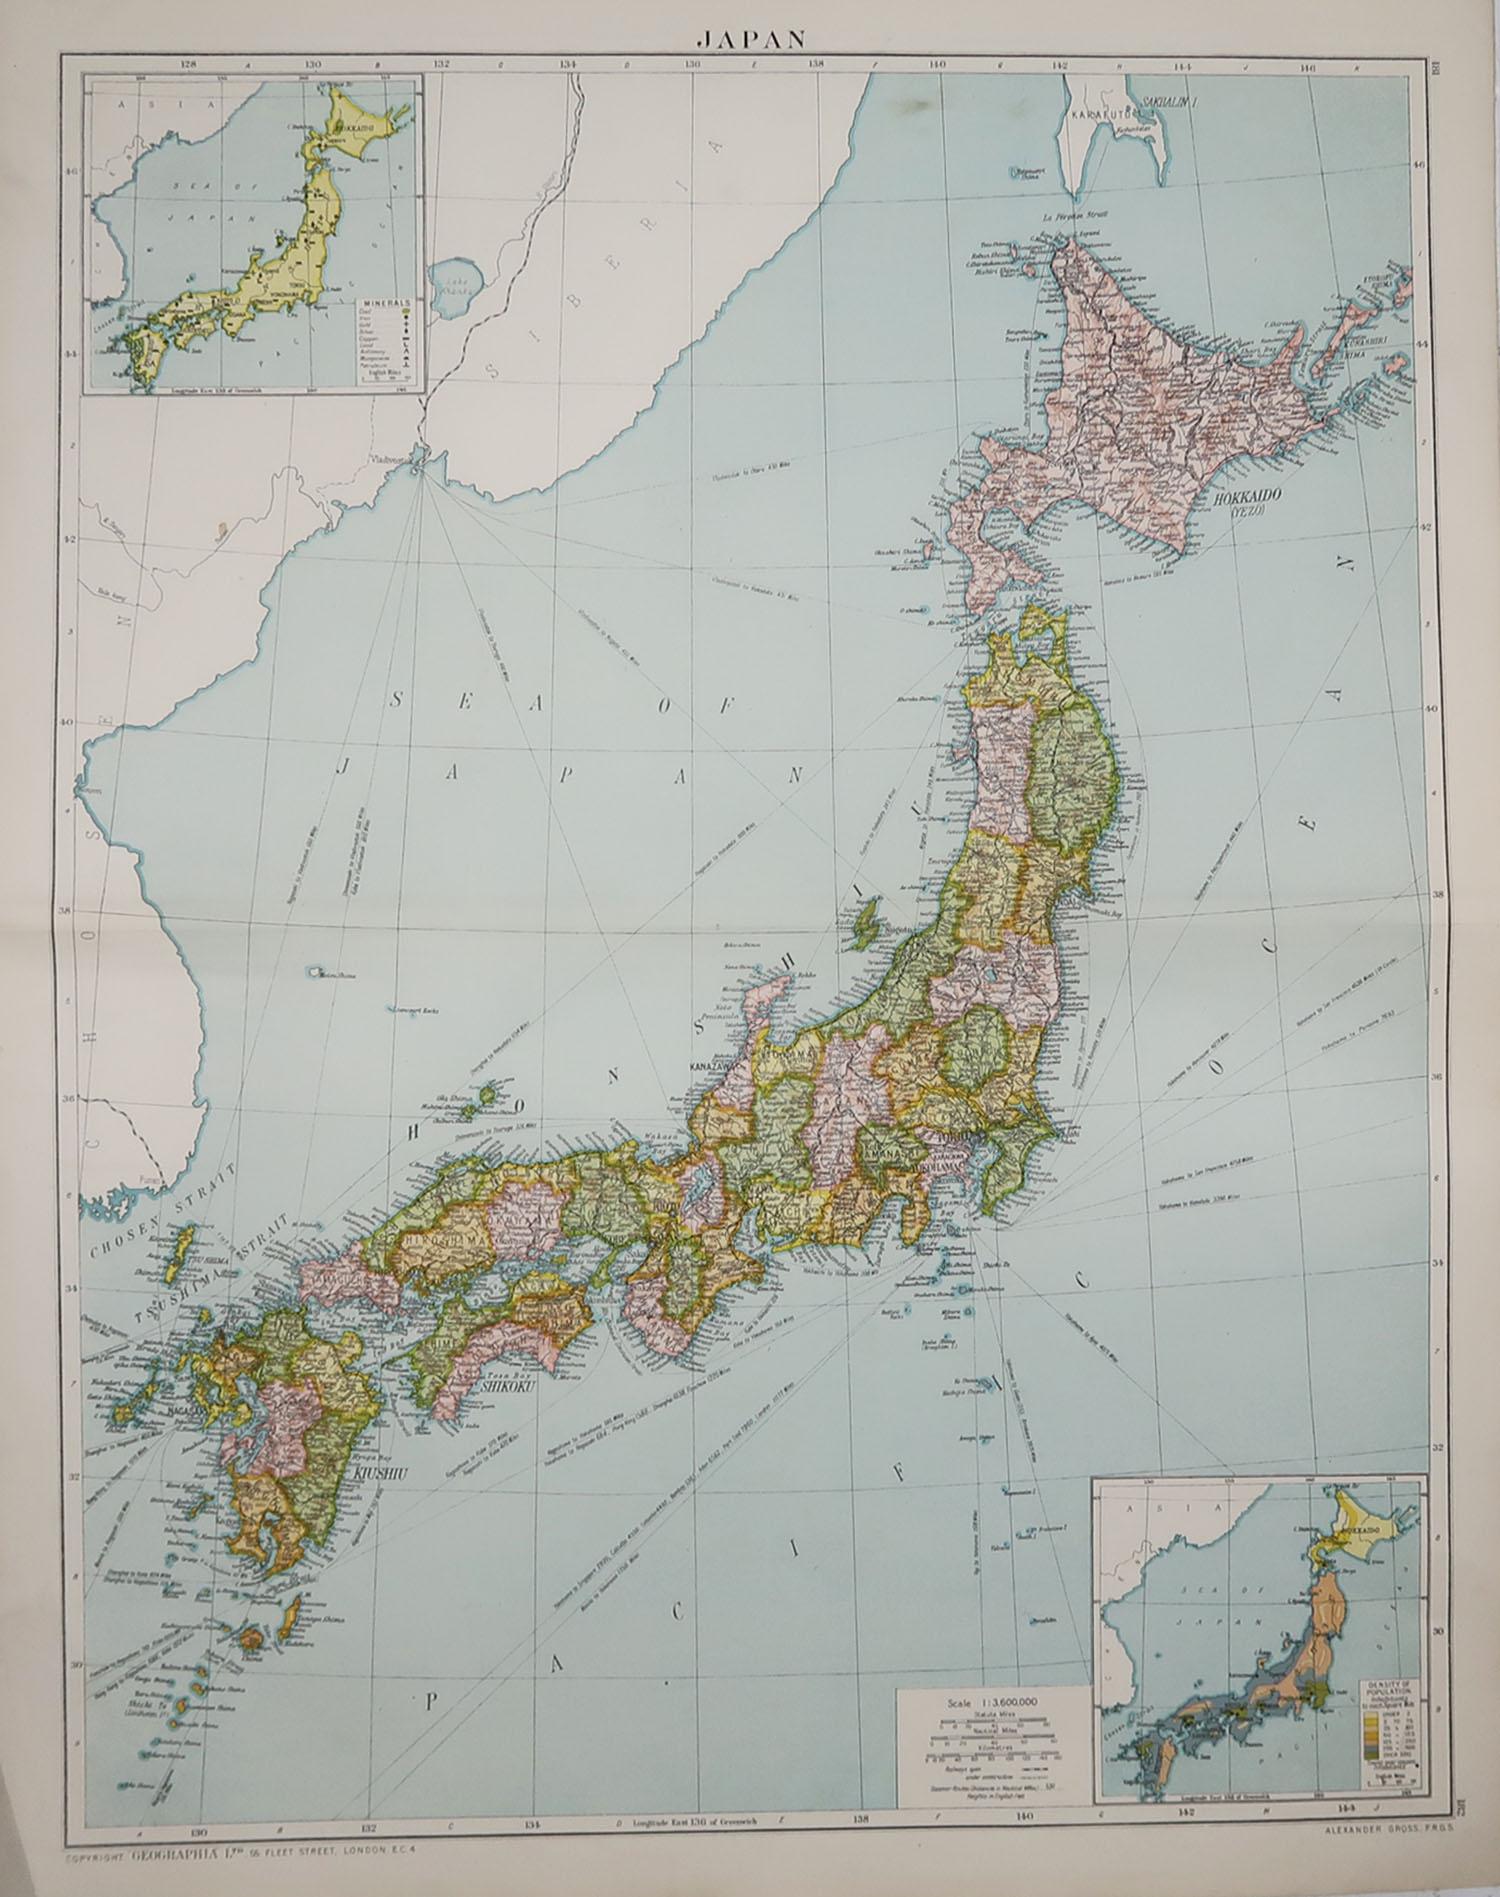 Great map of Japan

Original color. Good condition

Published by Alexander Gross

Unframed.










   